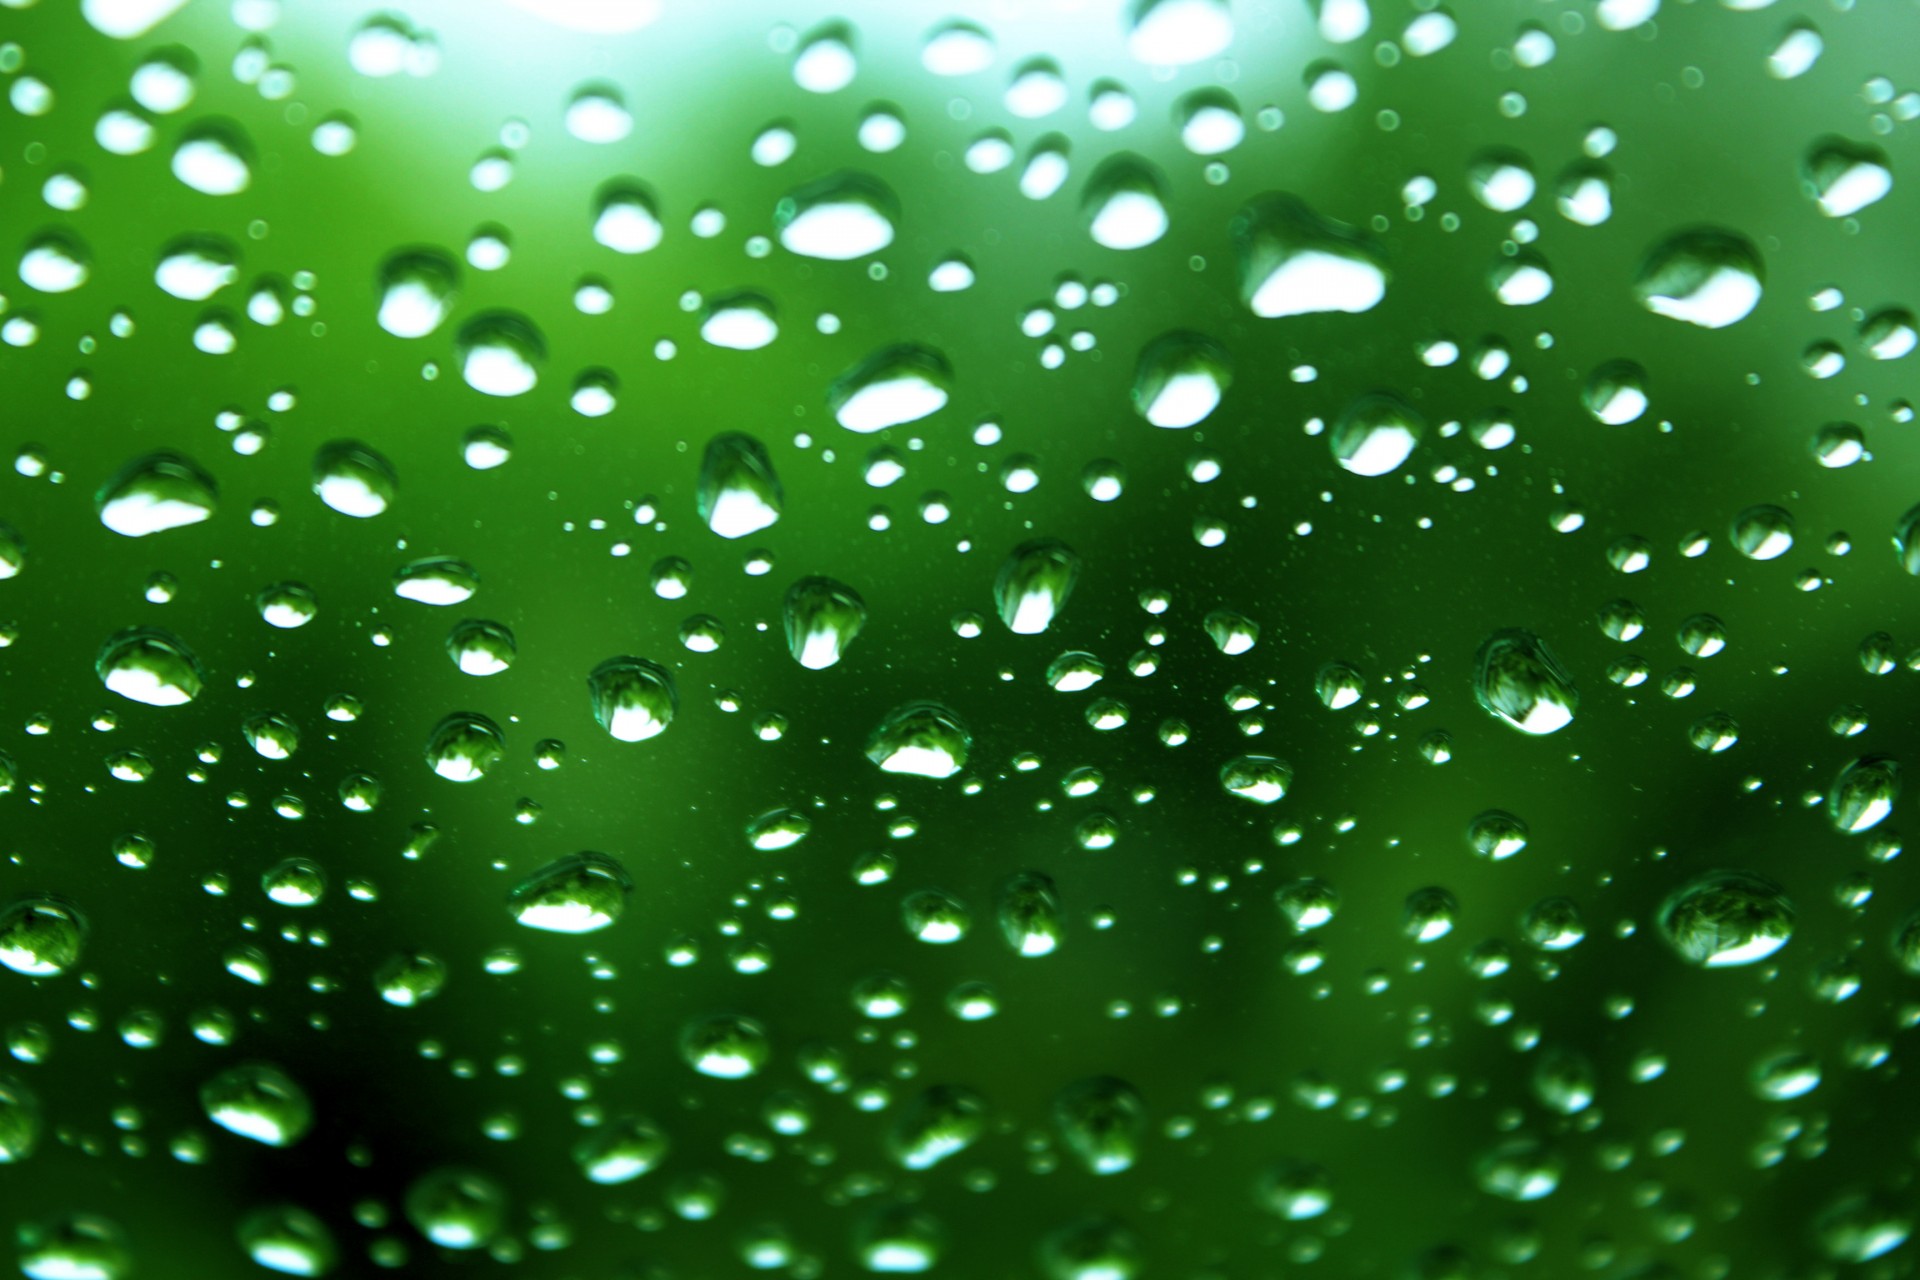 Green water drops background,green,water drops,background,green background  - free image from 